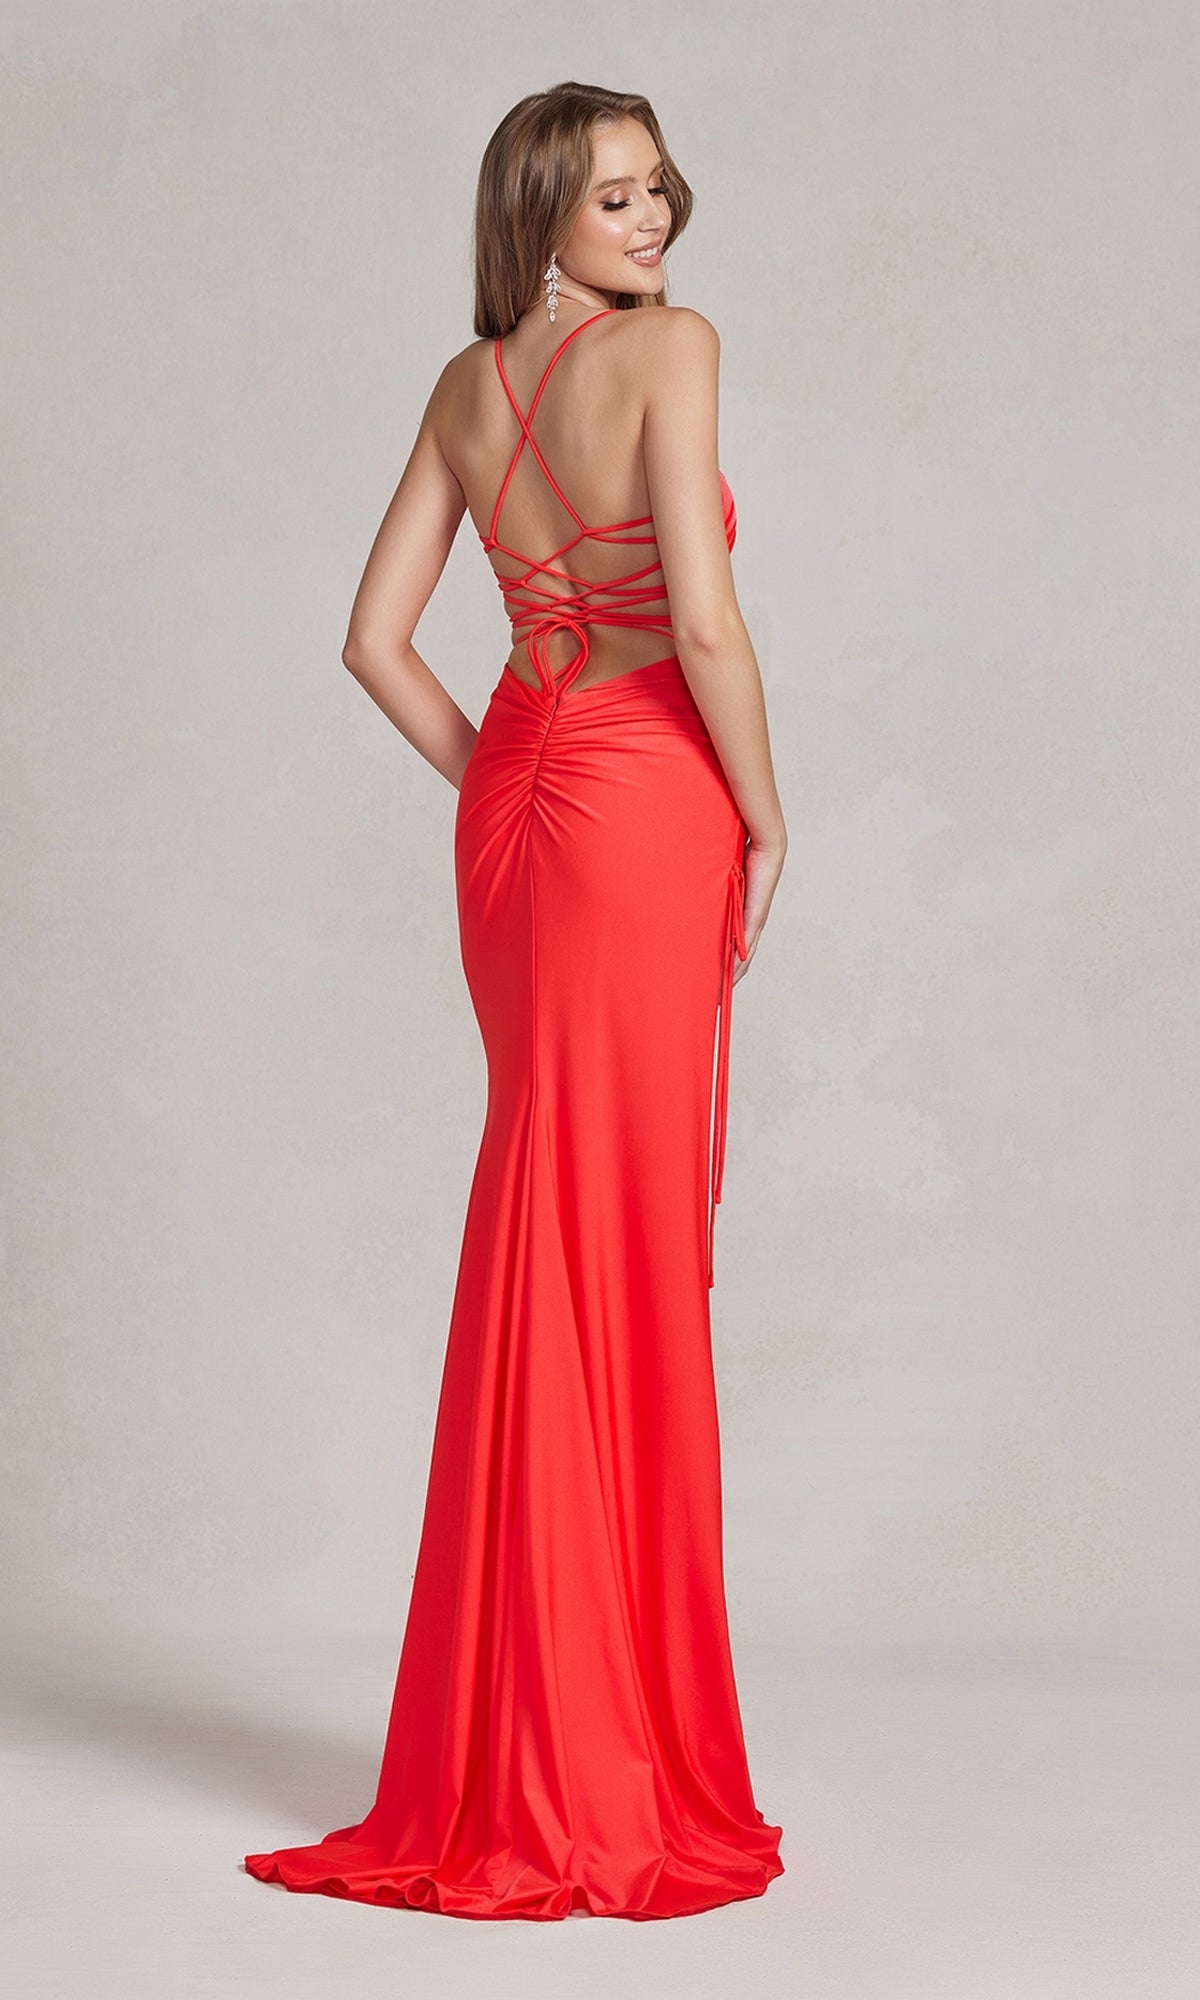 Strappy-Back Affordable Long Prom Dress